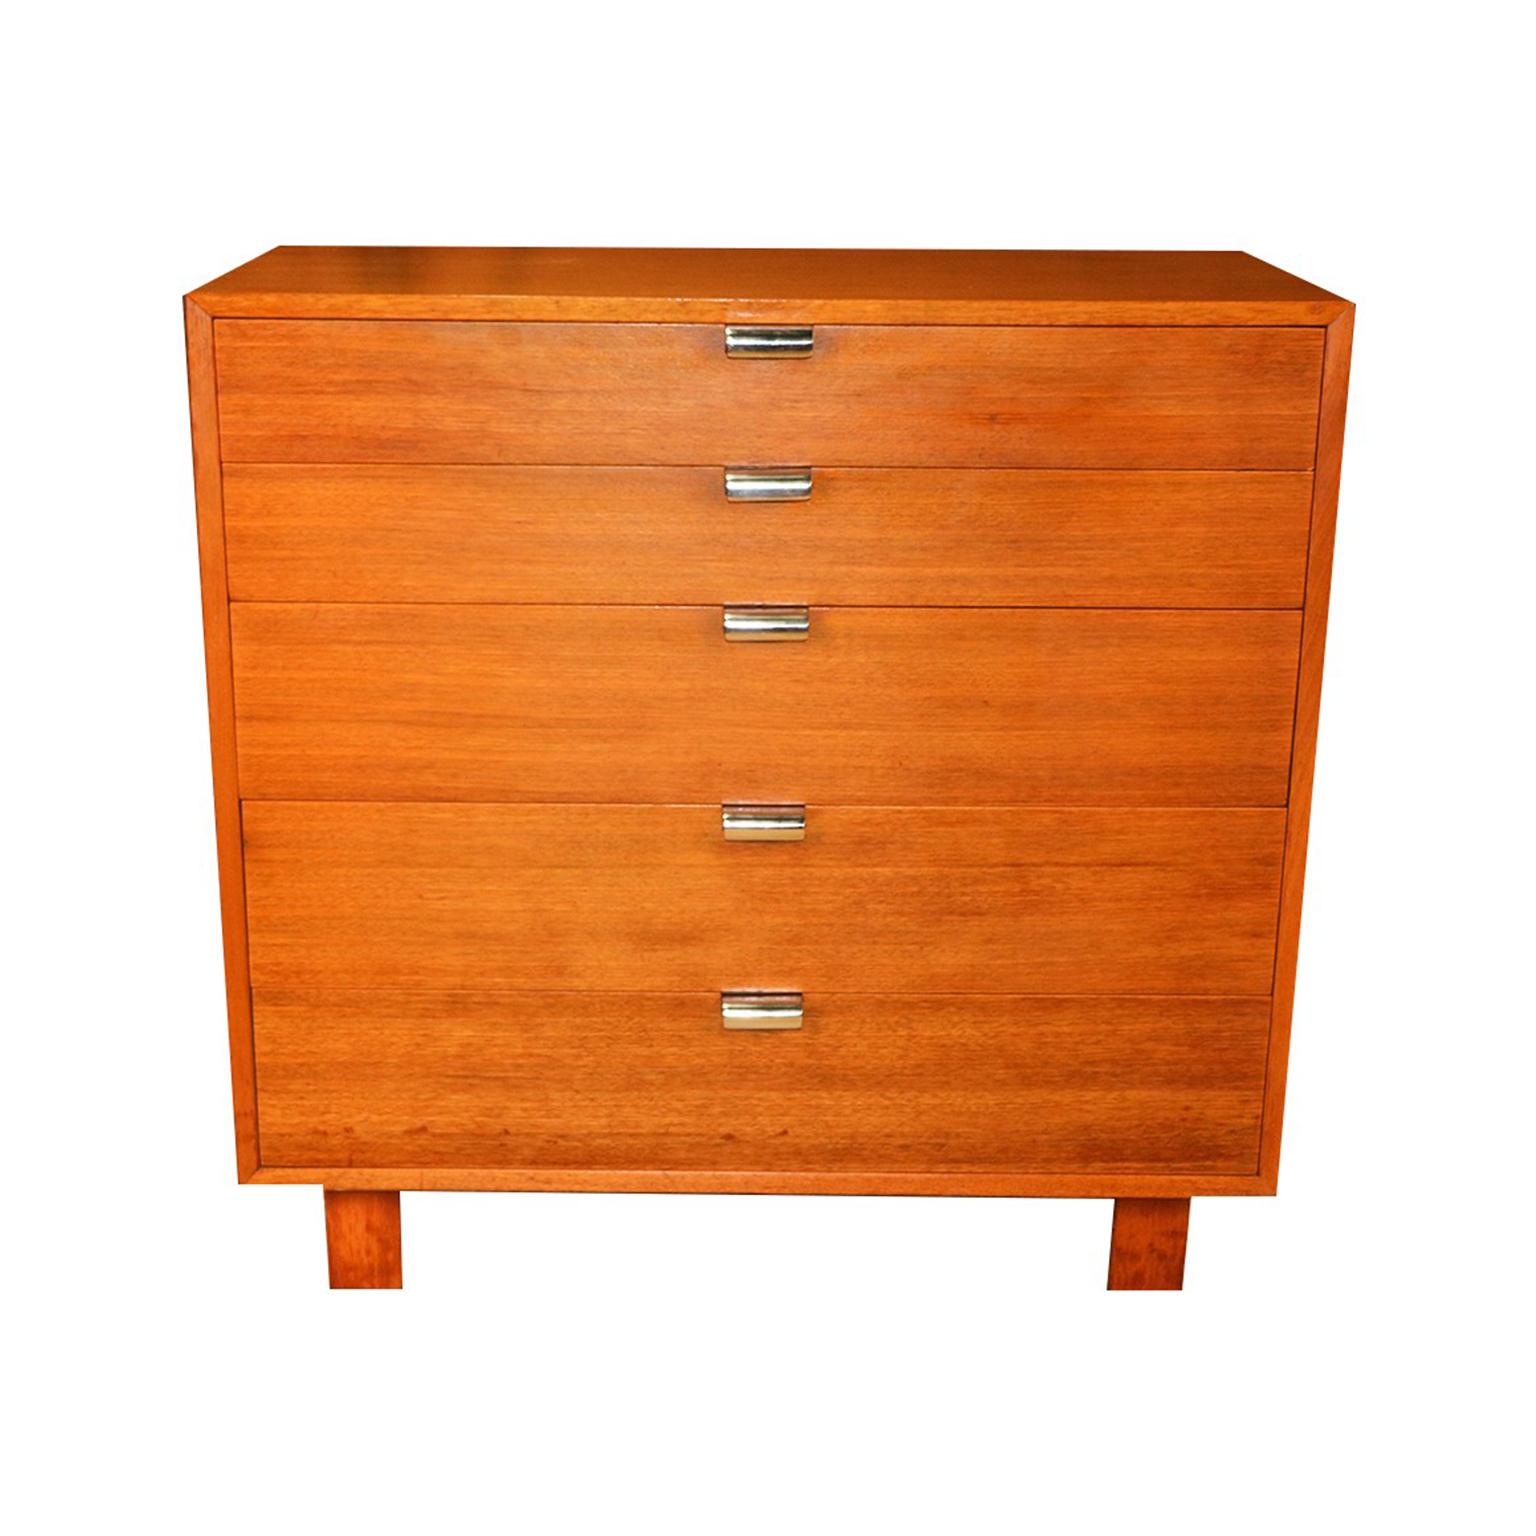 Iconic and classic Mid-Century Modern dresser designed by George Nelson for the Herman Miller Primavera line, circa 1950s. Featuring a gorgeous walnut wood dresser with five spacious dovetailed drawers adorned with original striking brushed polished